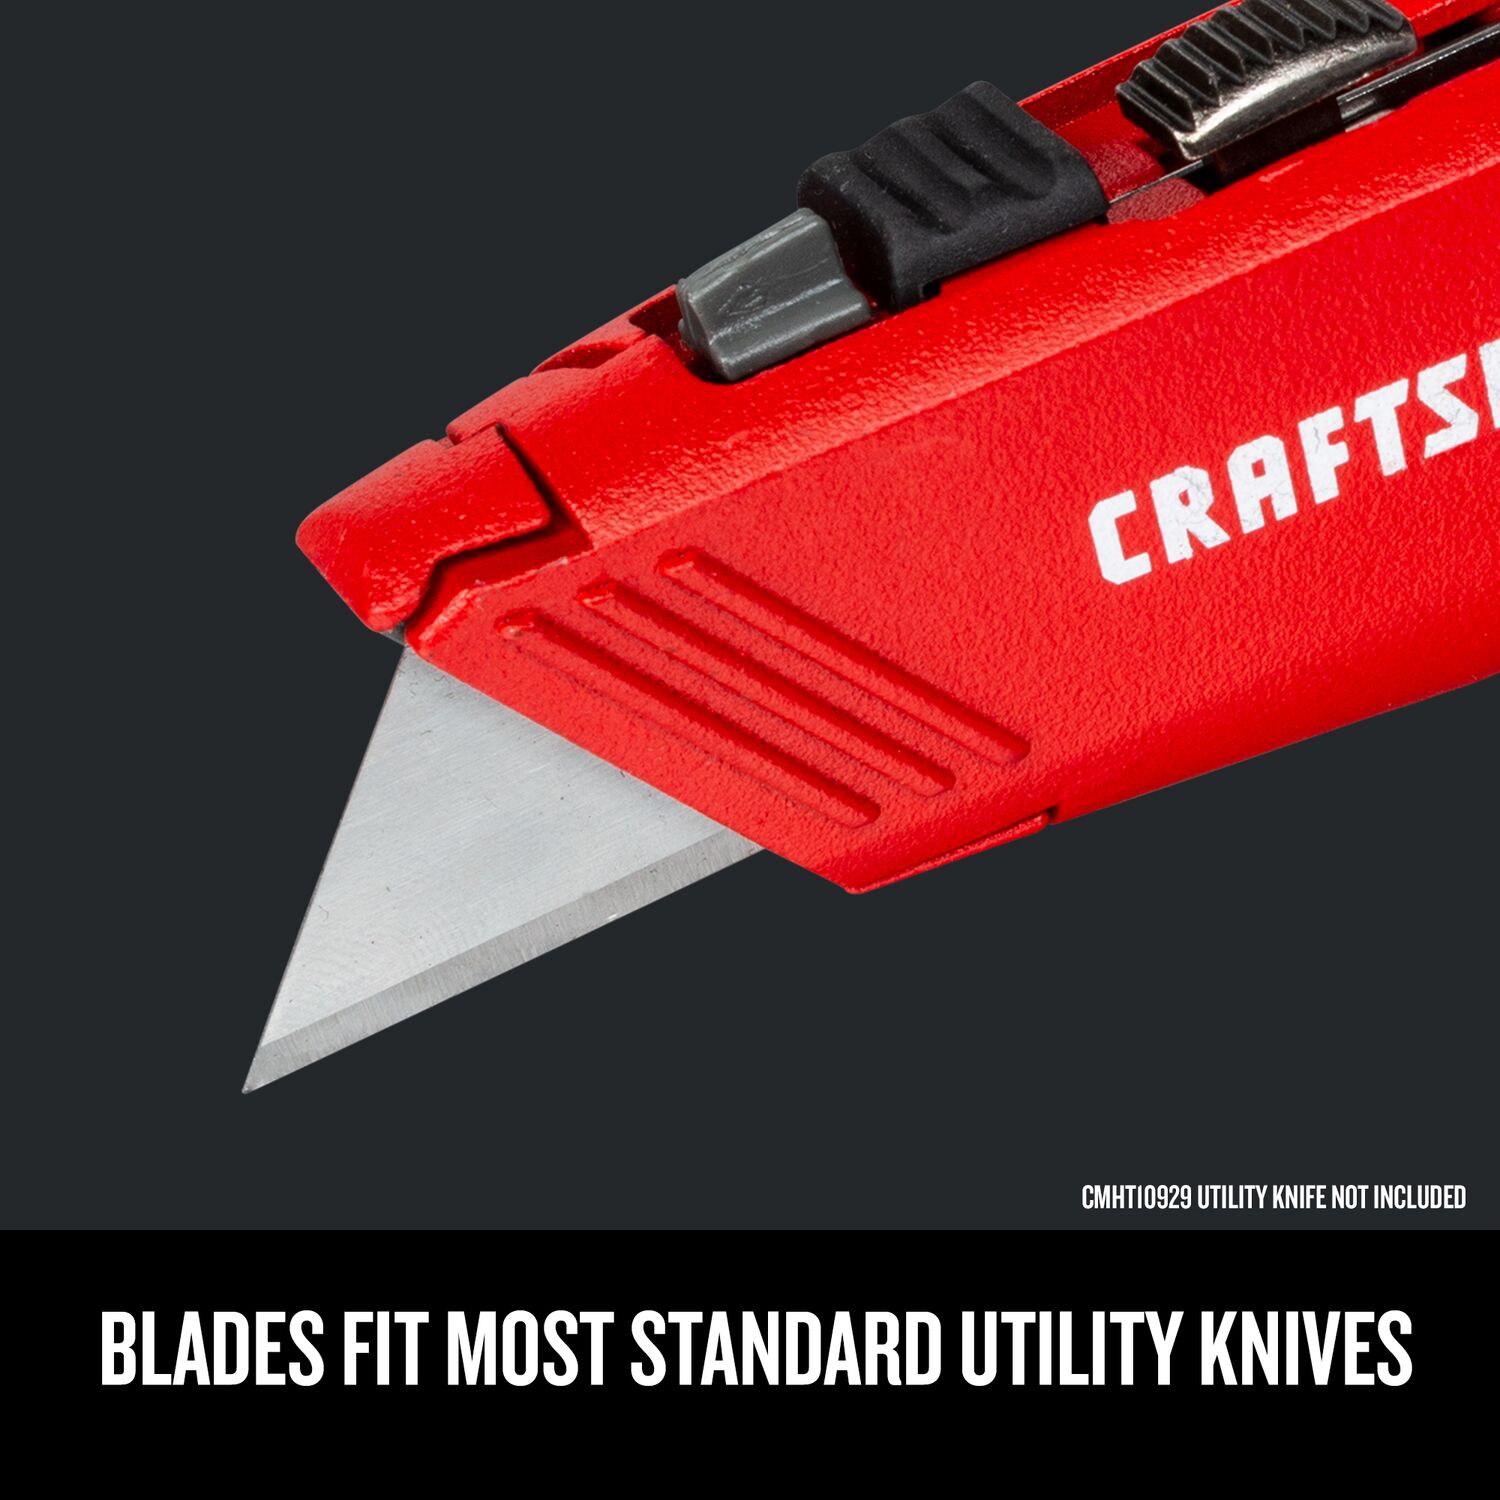 Utility Knife Blades, 100 Pack